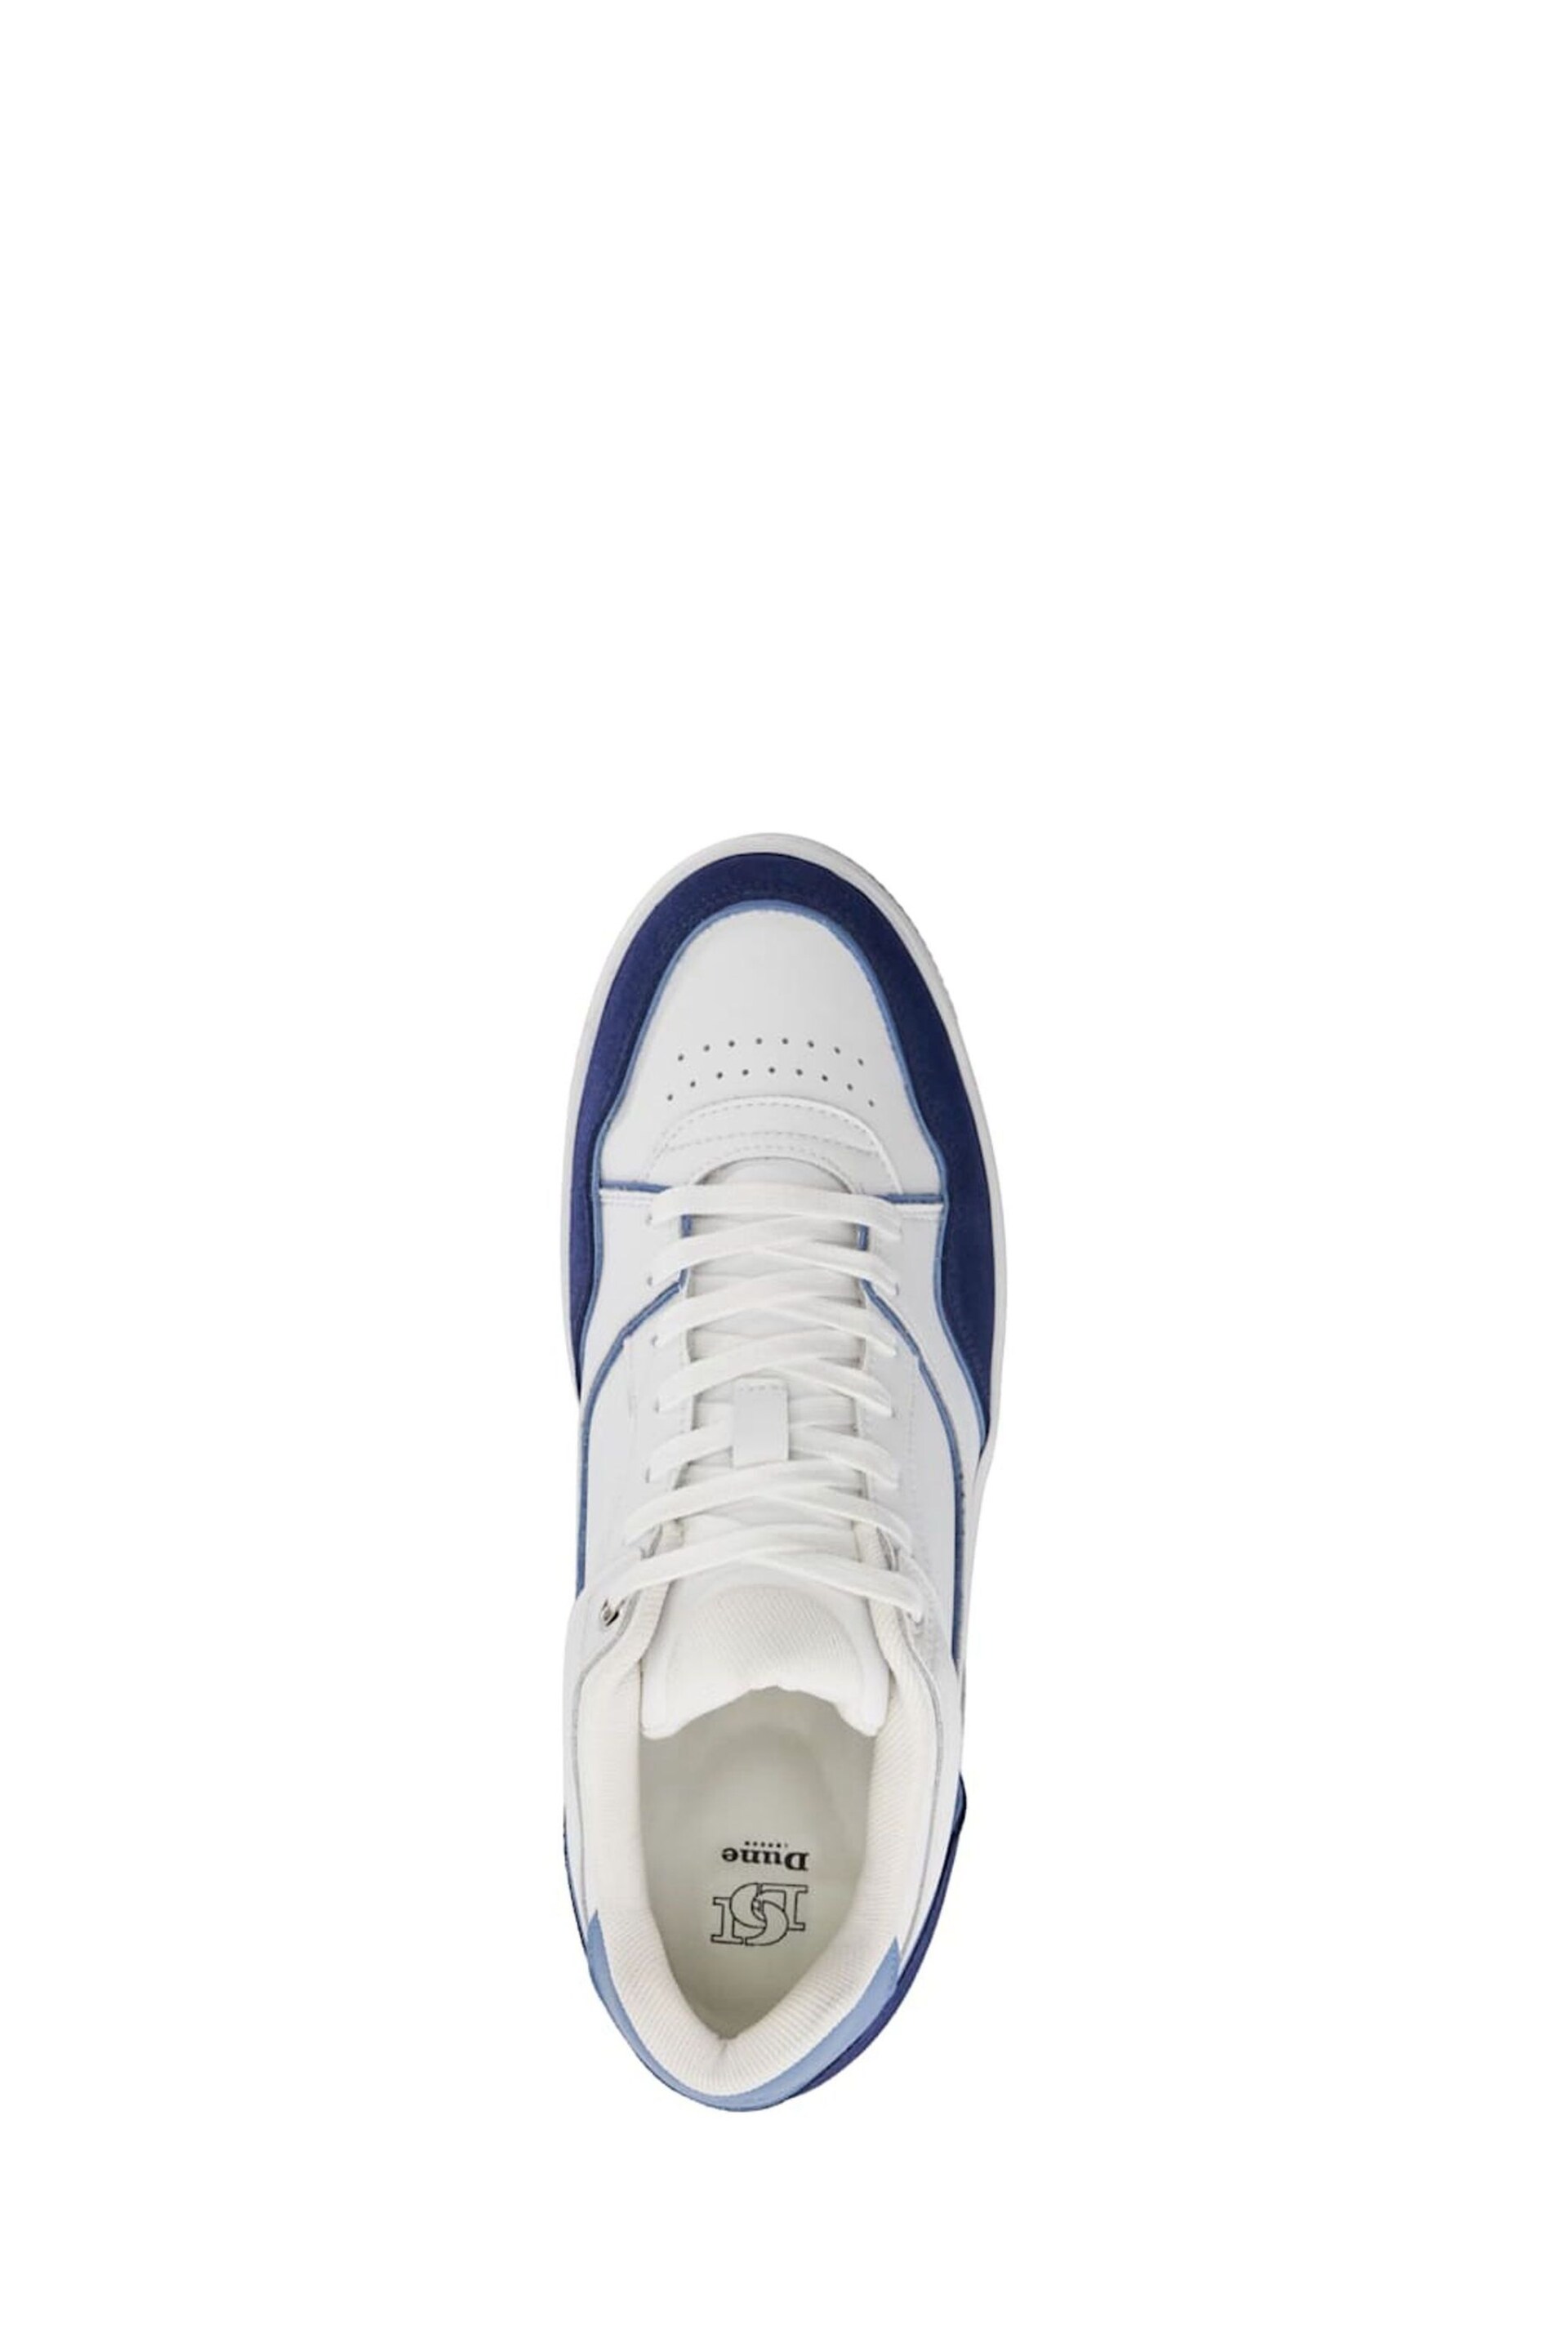 Dune London Blue Tainted Chunky Court Trainers - Image 4 of 5